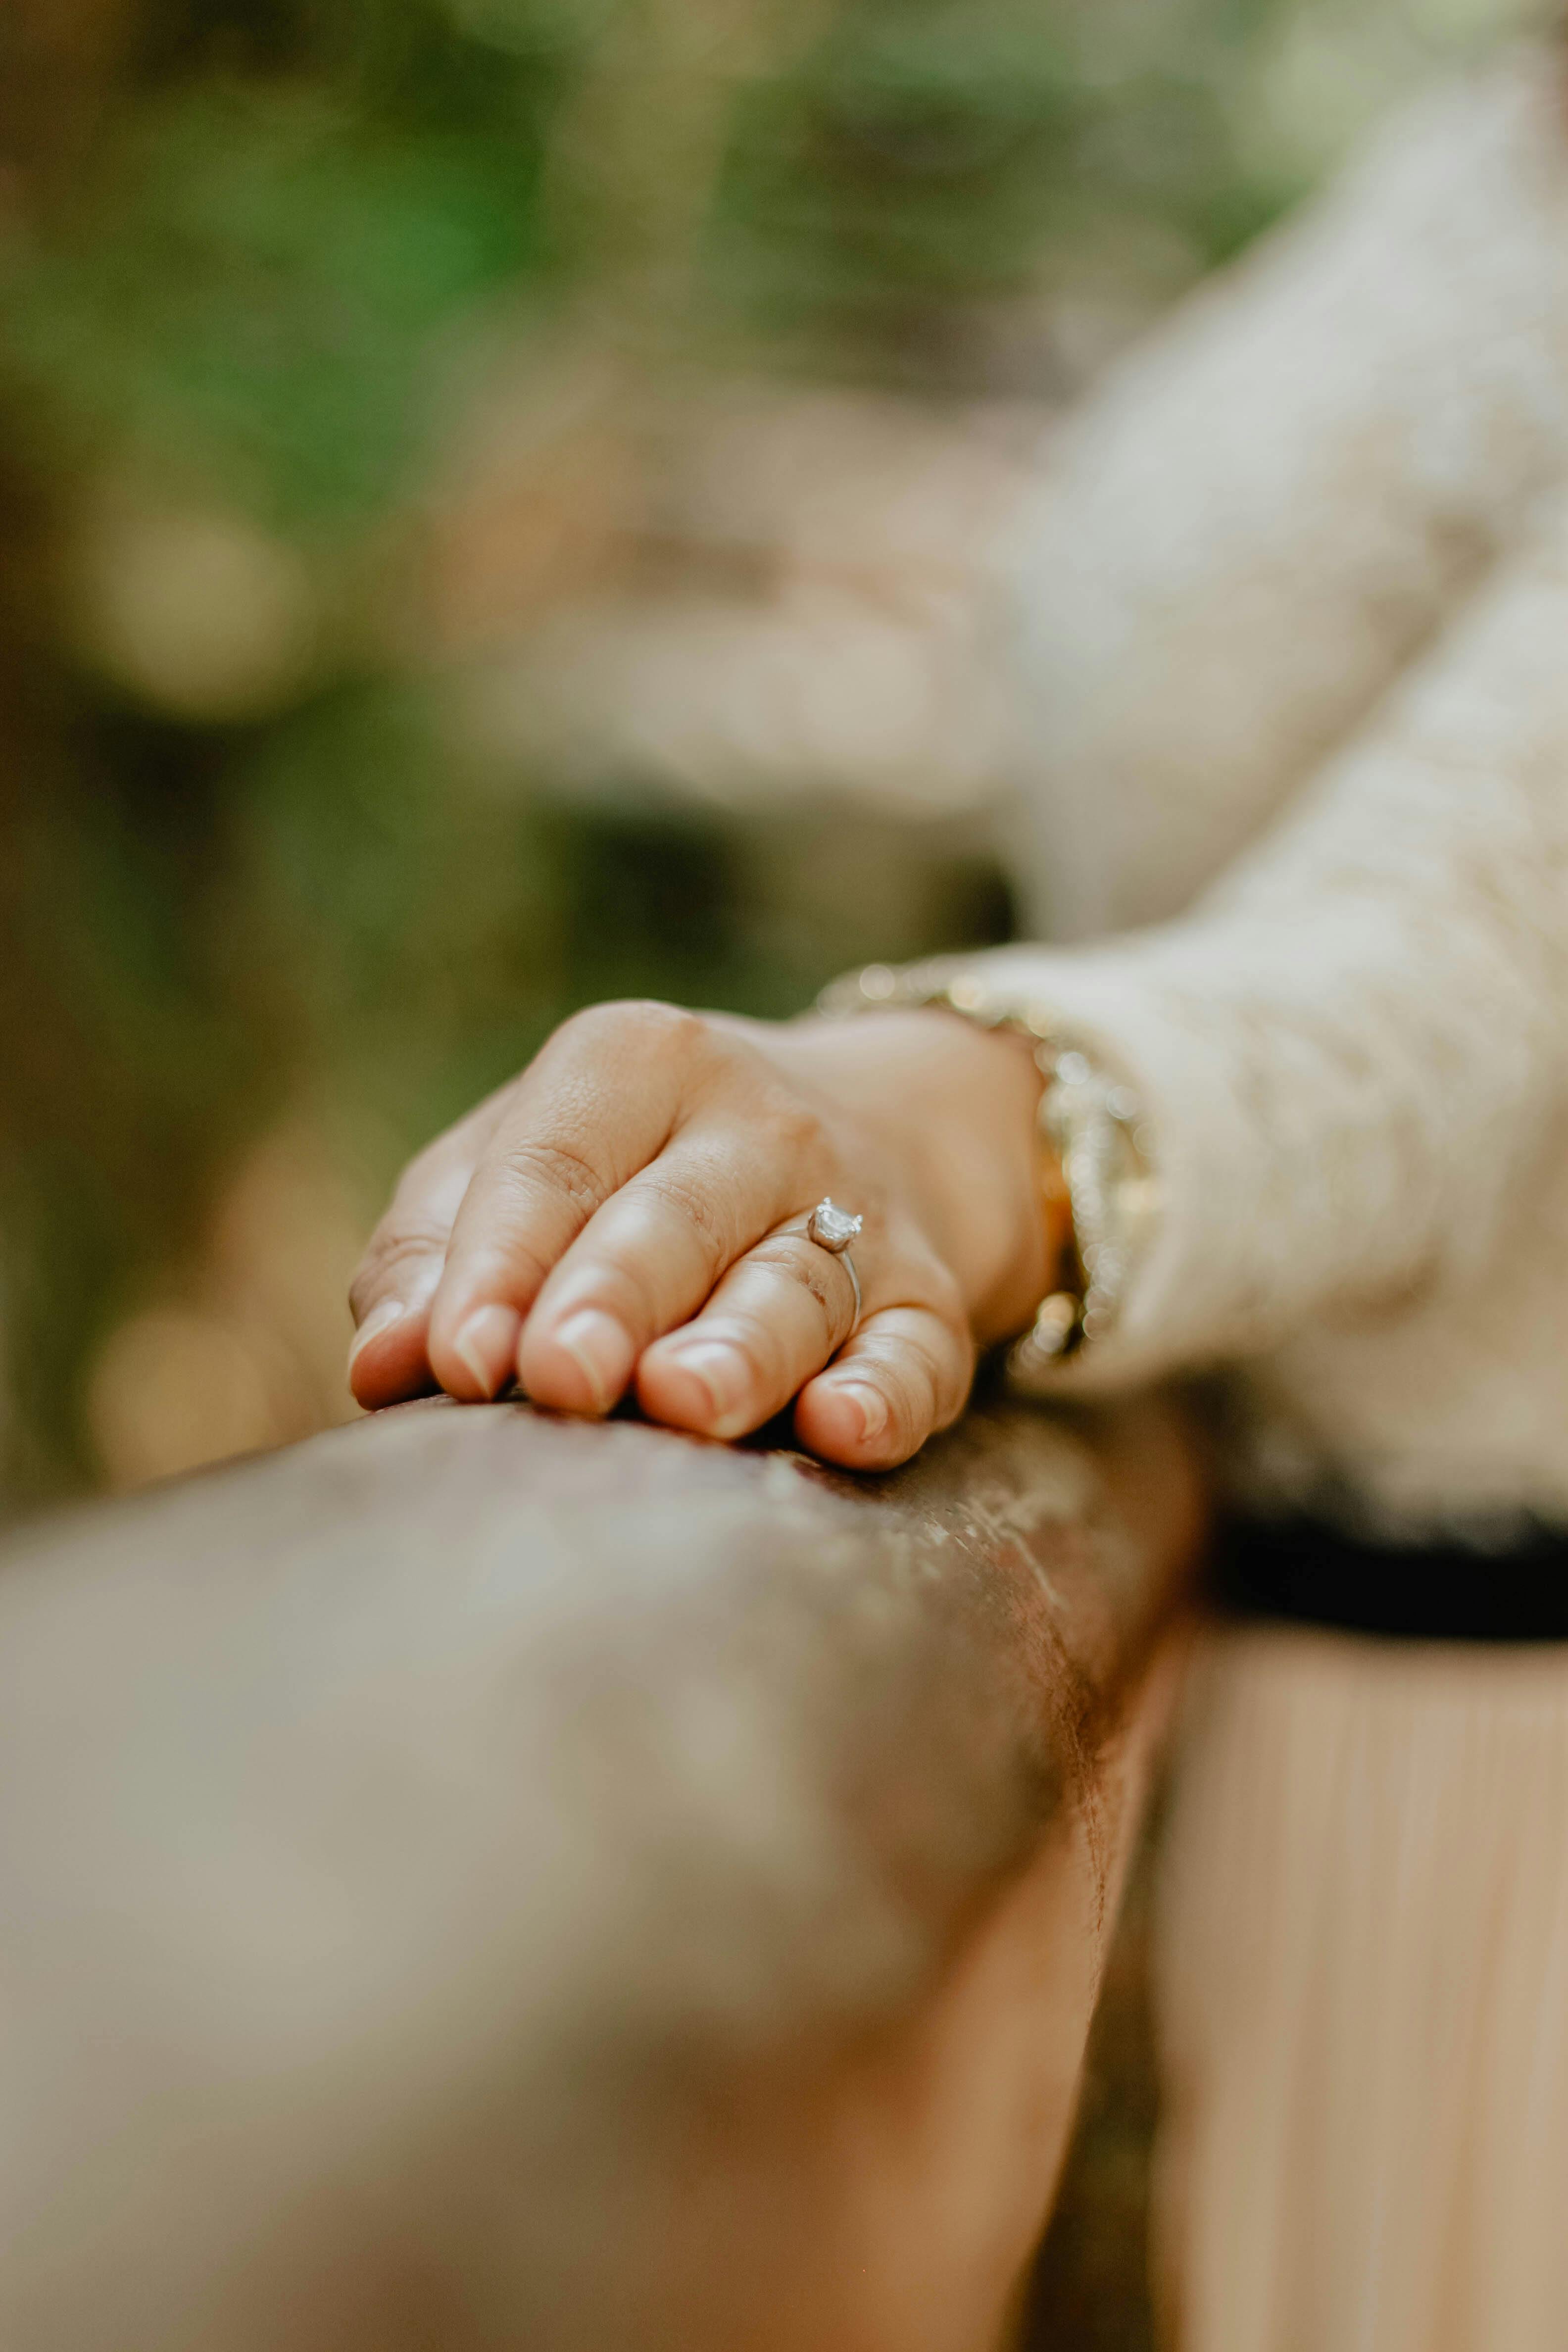 A woman showing off her engagement ring | Source: Pexels